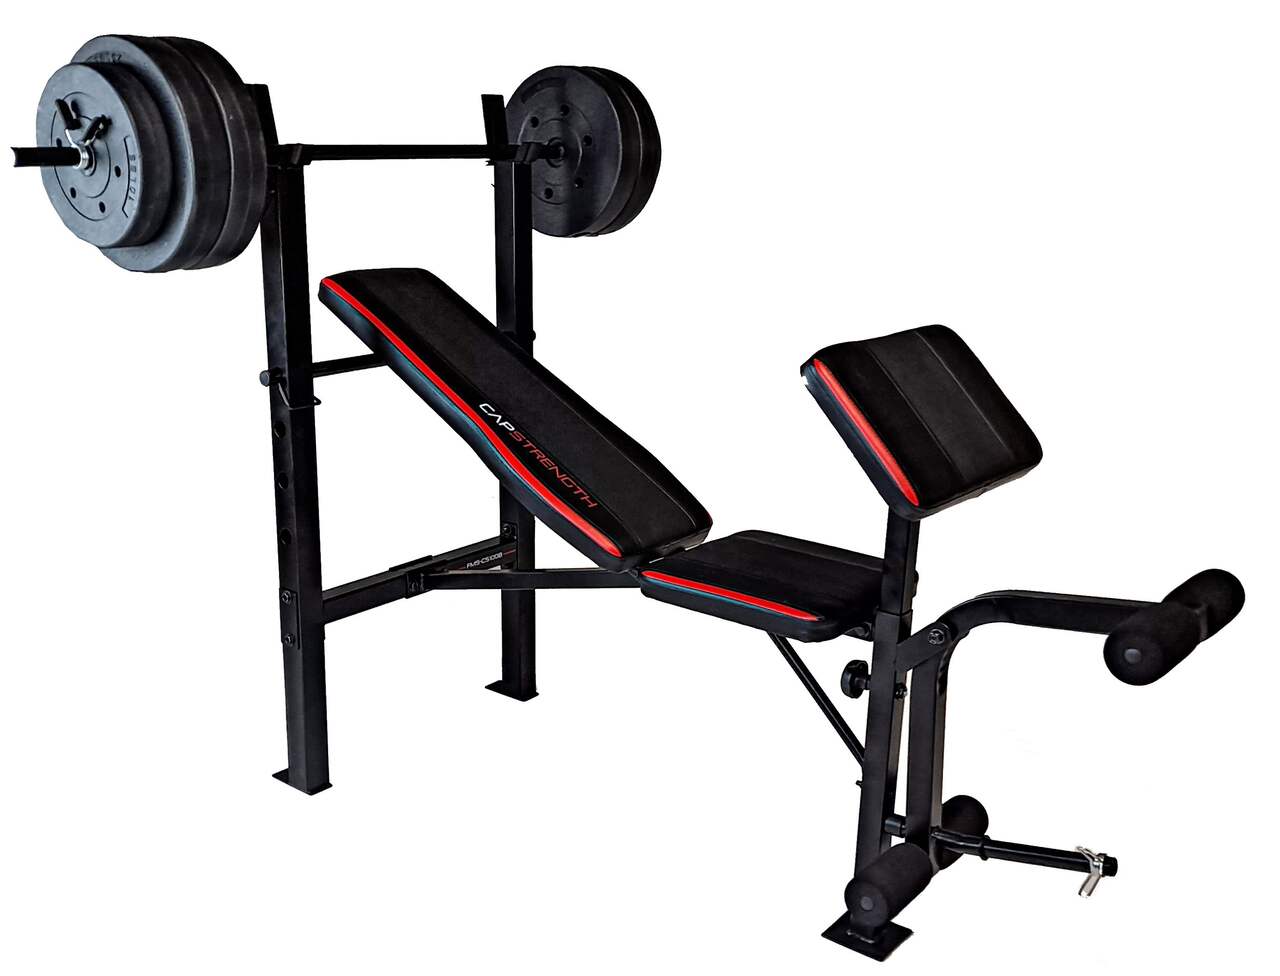 https://media-www.canadiantire.ca/product/playing/exercise/exercise-equipment/0840542/bench-100lb-weight-set-67a783f2-a5df-4a55-85cf-c776d27eb78d-jpgrendition.jpg?imdensity=1&imwidth=640&impolicy=mZoom